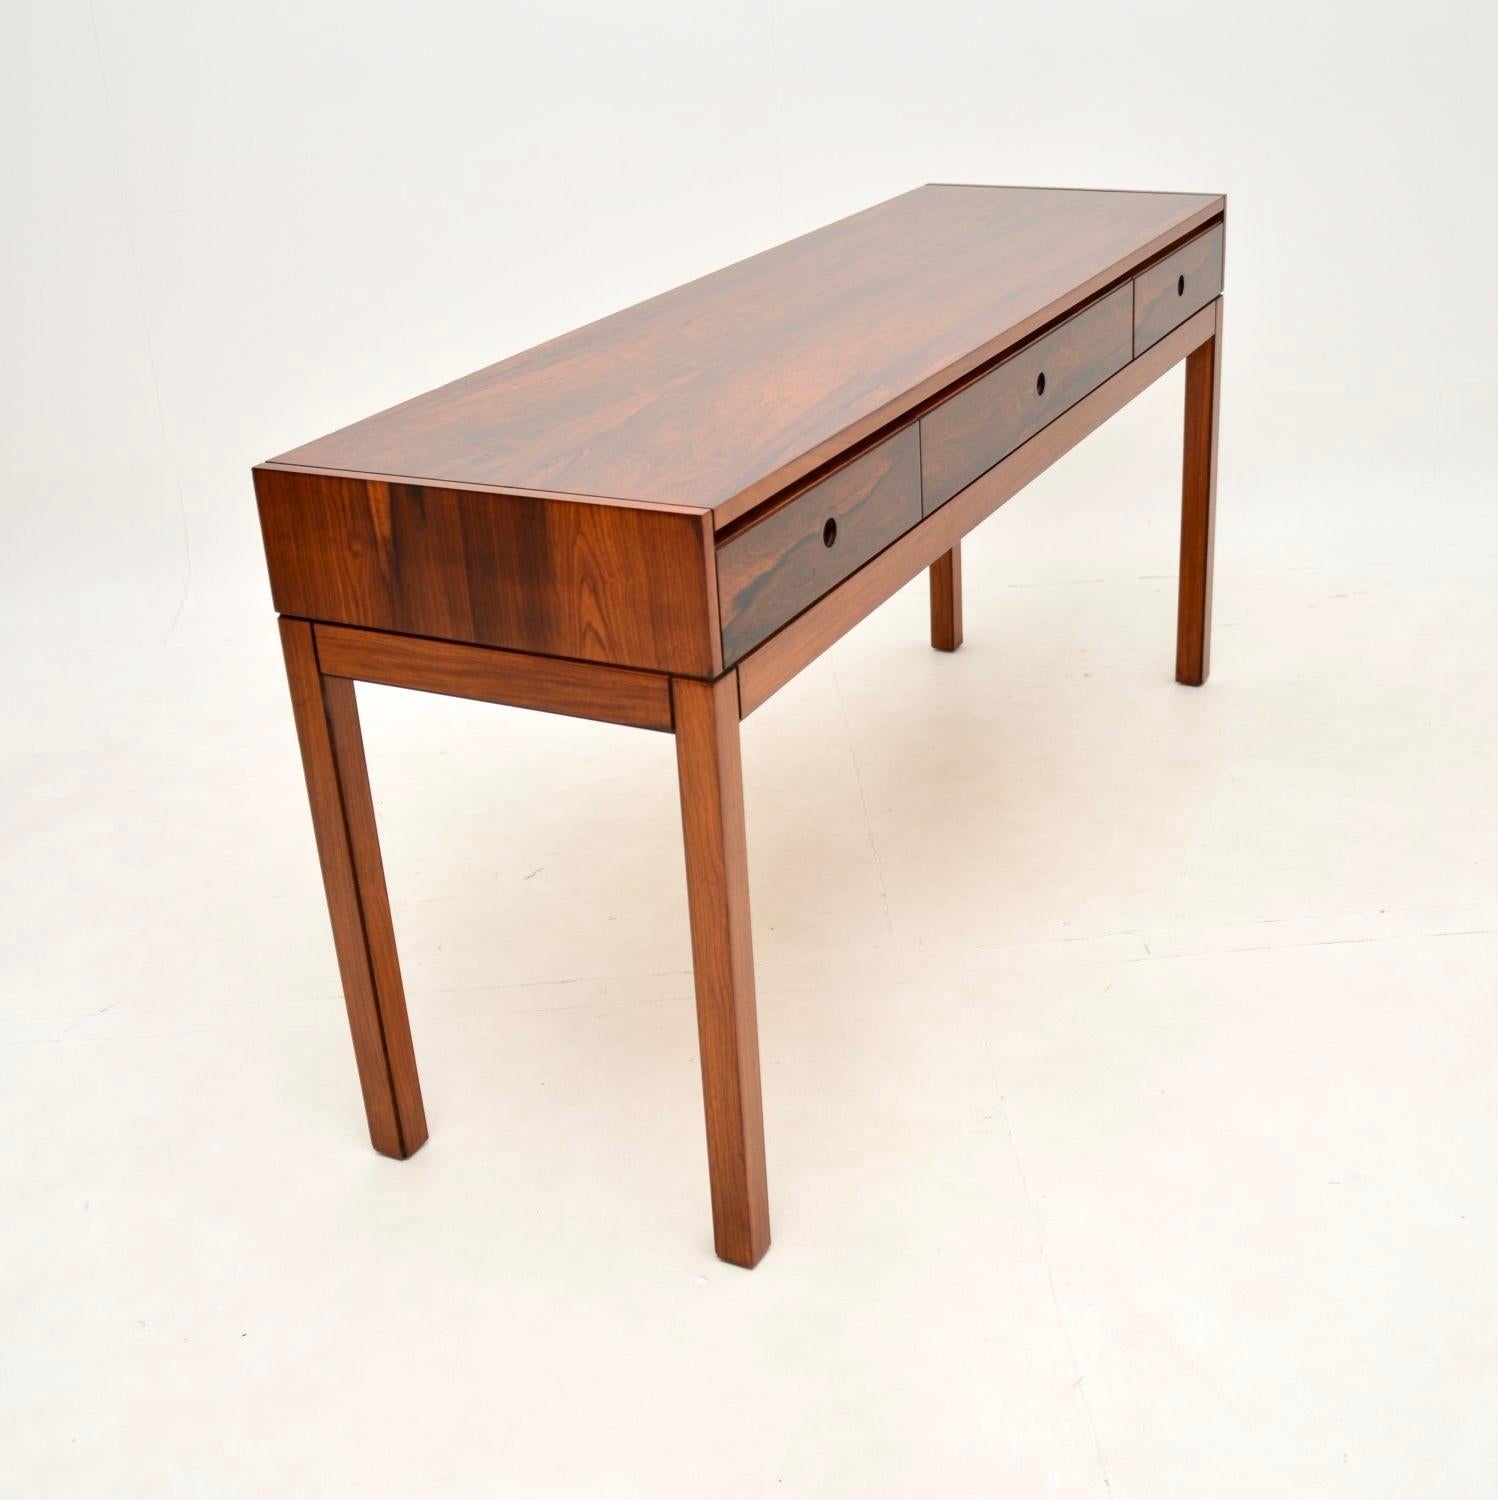 British Vintage Console Table by Robert Heritage for Archie Shine